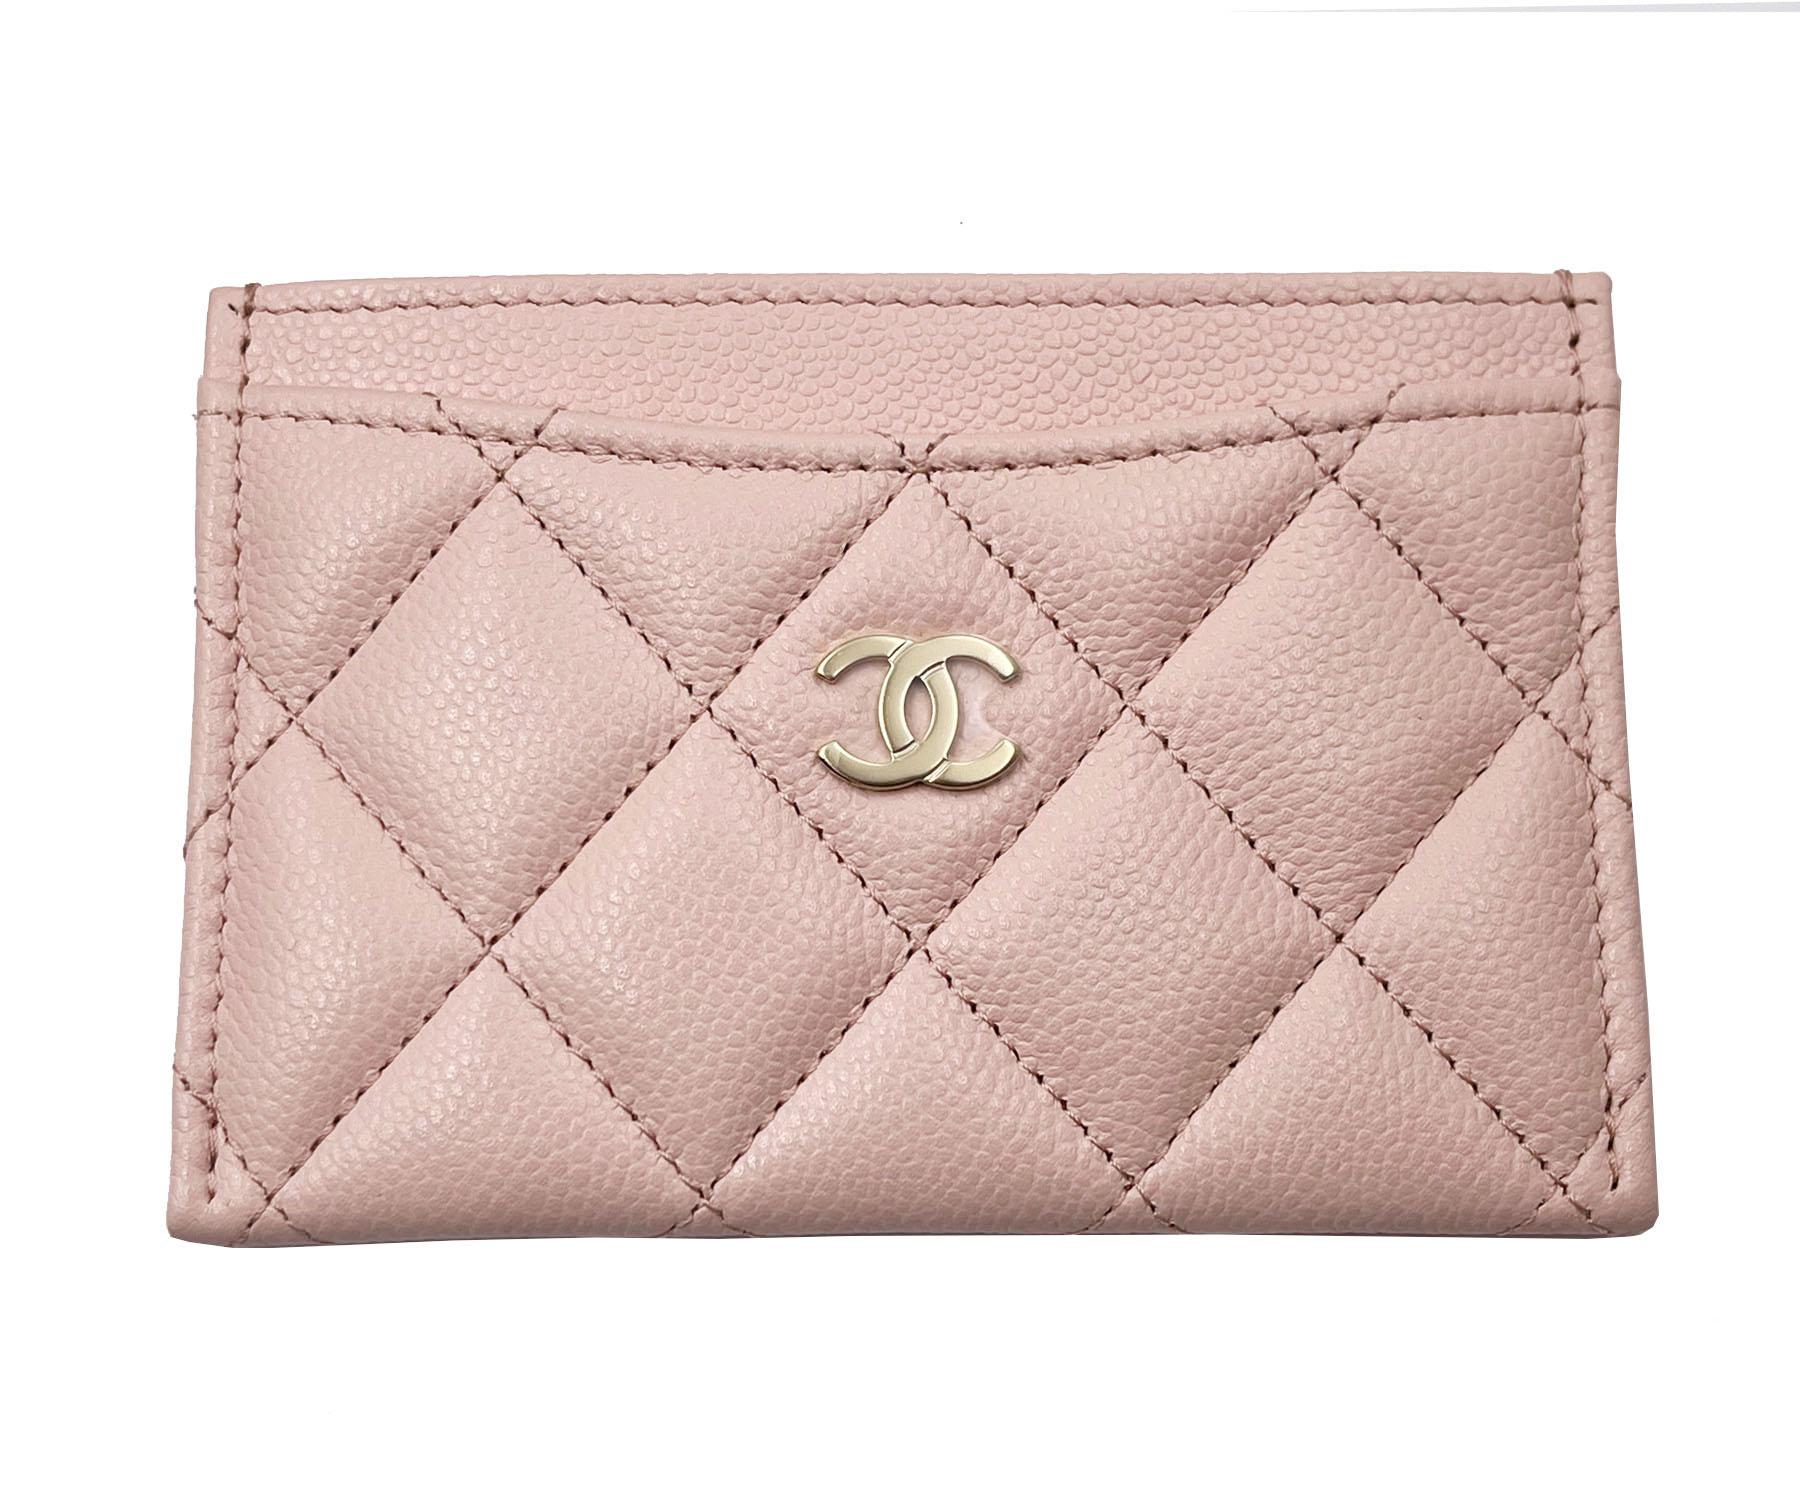 Chanel Brand New Gold CC Pale Pink Caviar Card Holder

*PKxxxxxx
*Made in Spain
*Comes with the original box, pouch, tag, booklet, ribbon and camellia
*Brand New 

-It is approximately 4.4